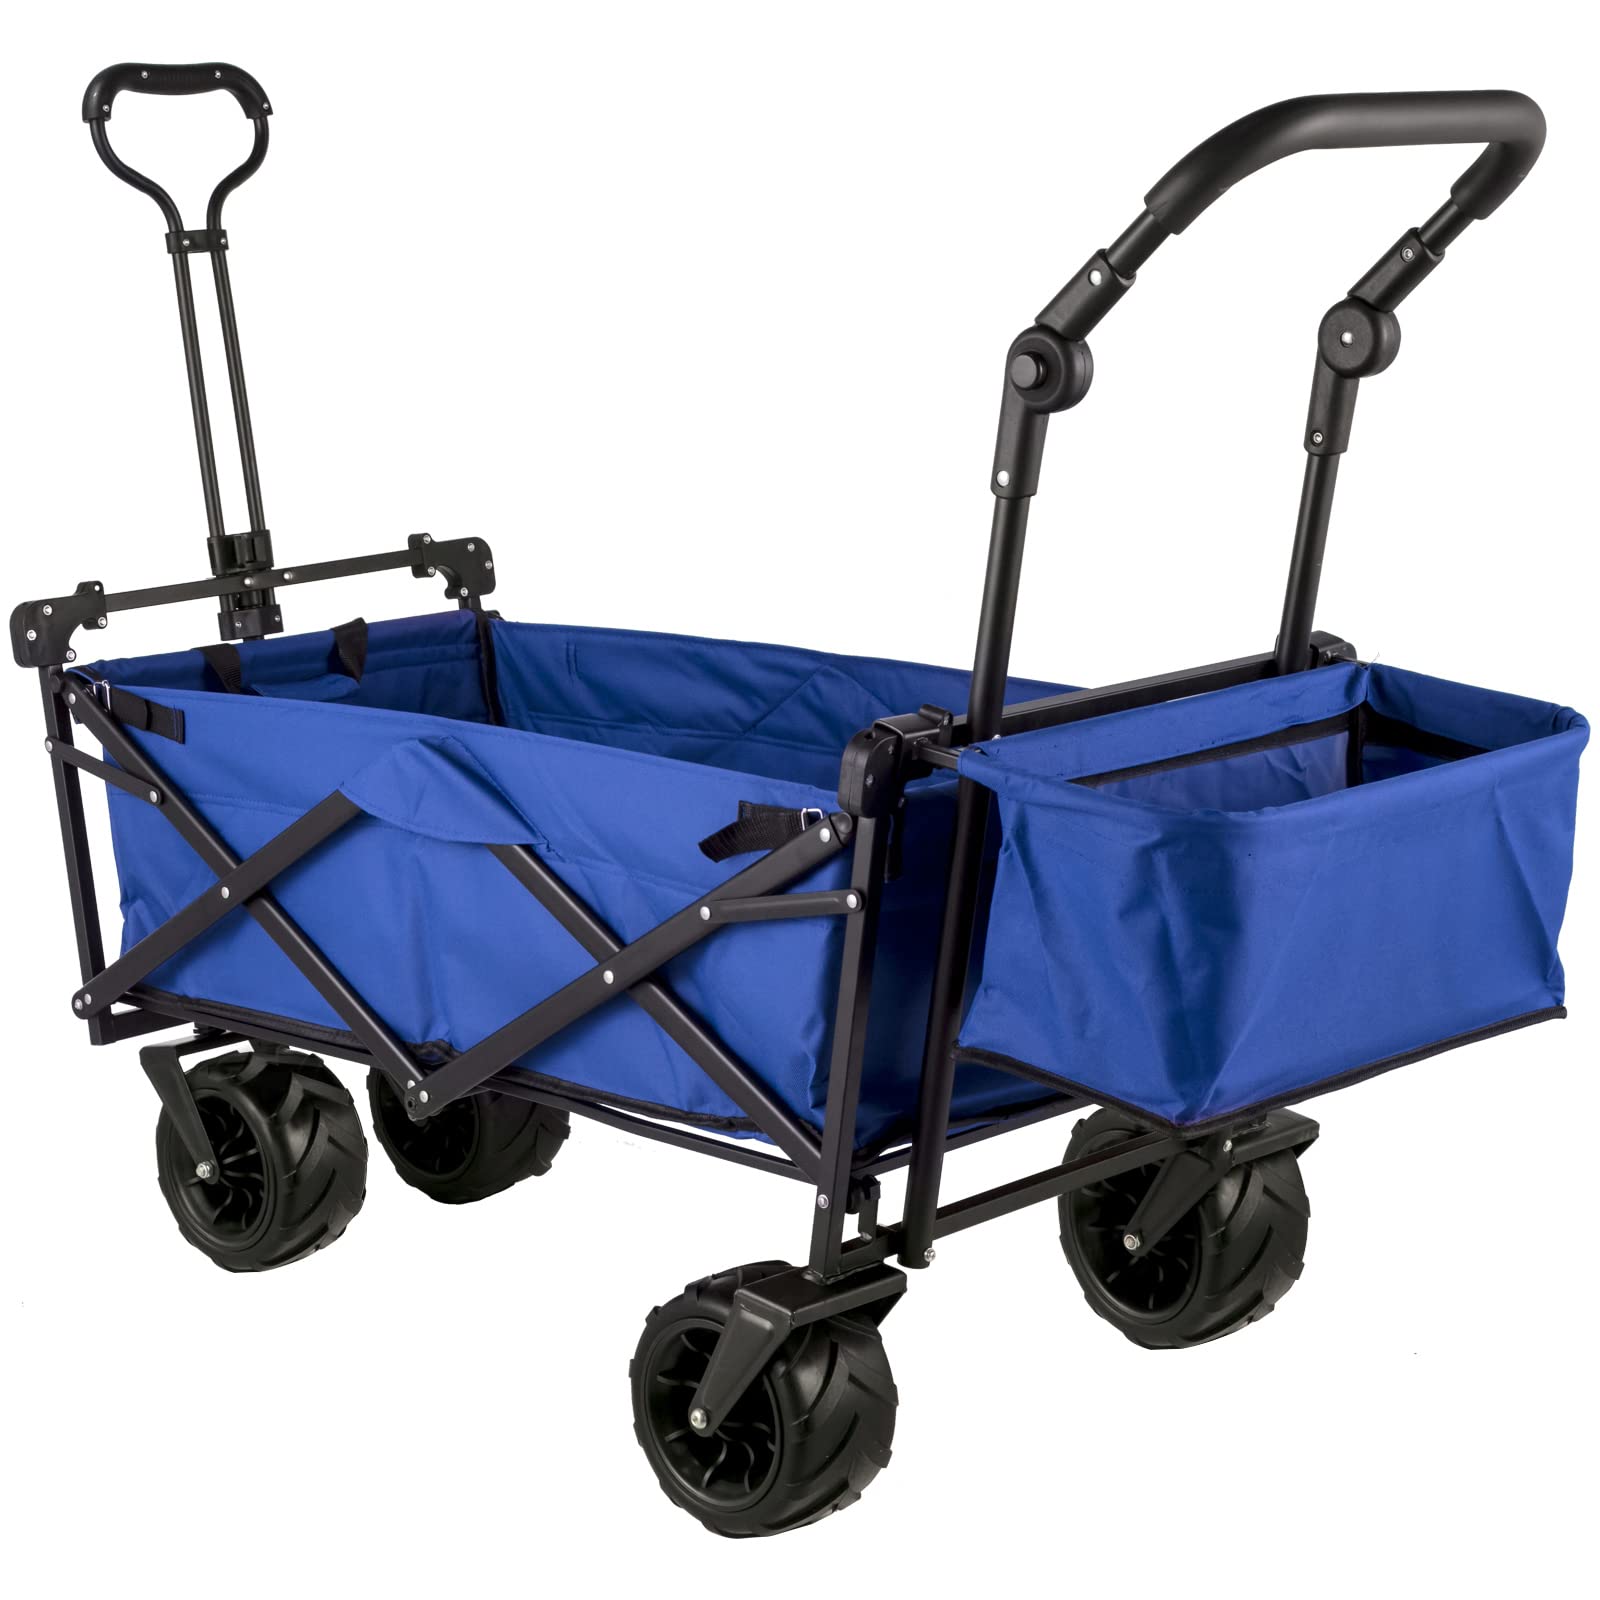 HAPPYBUY Extra Large Collapsible Garden Cart/Wagon with Removable Canopy, 220lbs Capacity Push& Pull Utility Cart with Rear Storage; Upgrad Padded Cotton 600D OxfortSecure Lock (40IN40IN20IN, Blue)